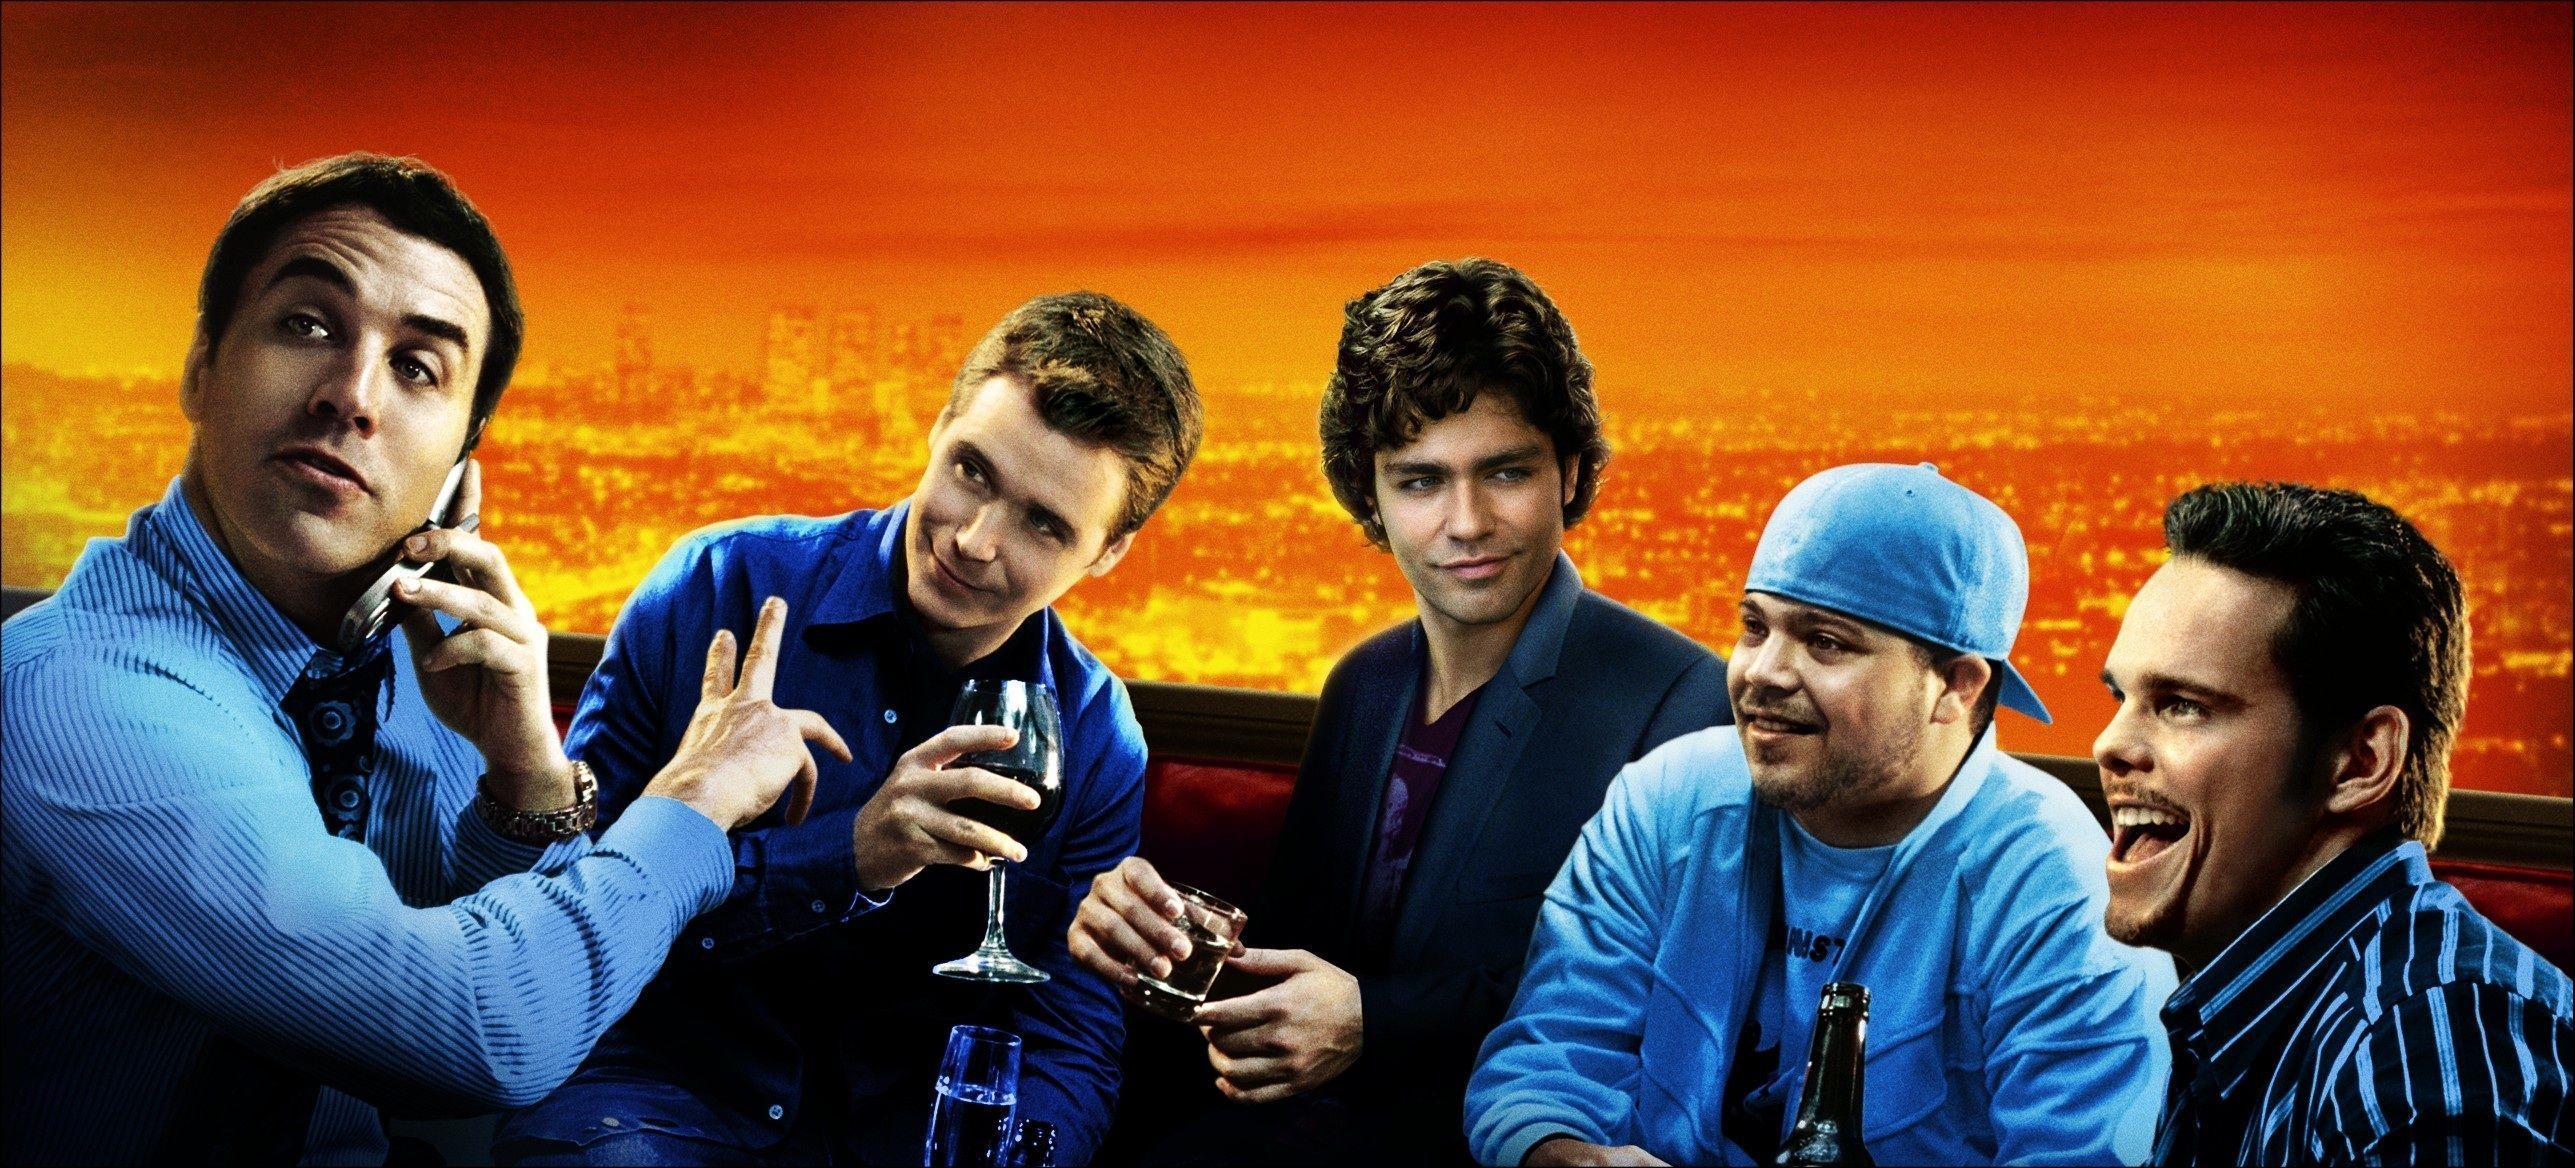 Kevin Connolly: Entourage, Kevin Dillon as Johnny Chase, Adrian Grenier as Vincent Chase, Eric Murphy. 2580x1170 Dual Screen Wallpaper.